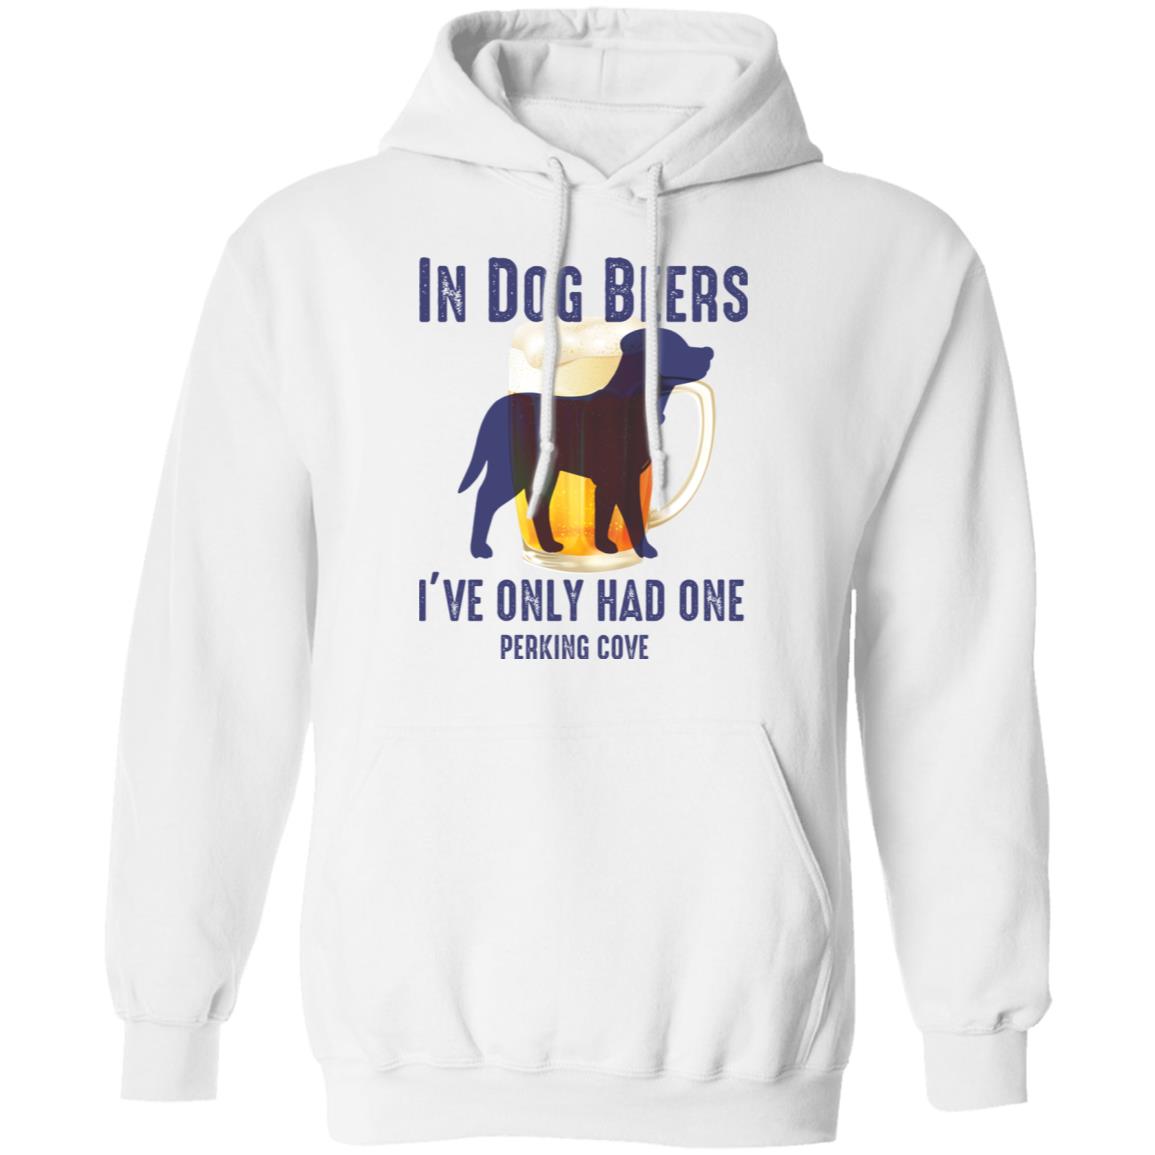 In Dog Beers I’ve Only Had One Perking Cove Shirt 1